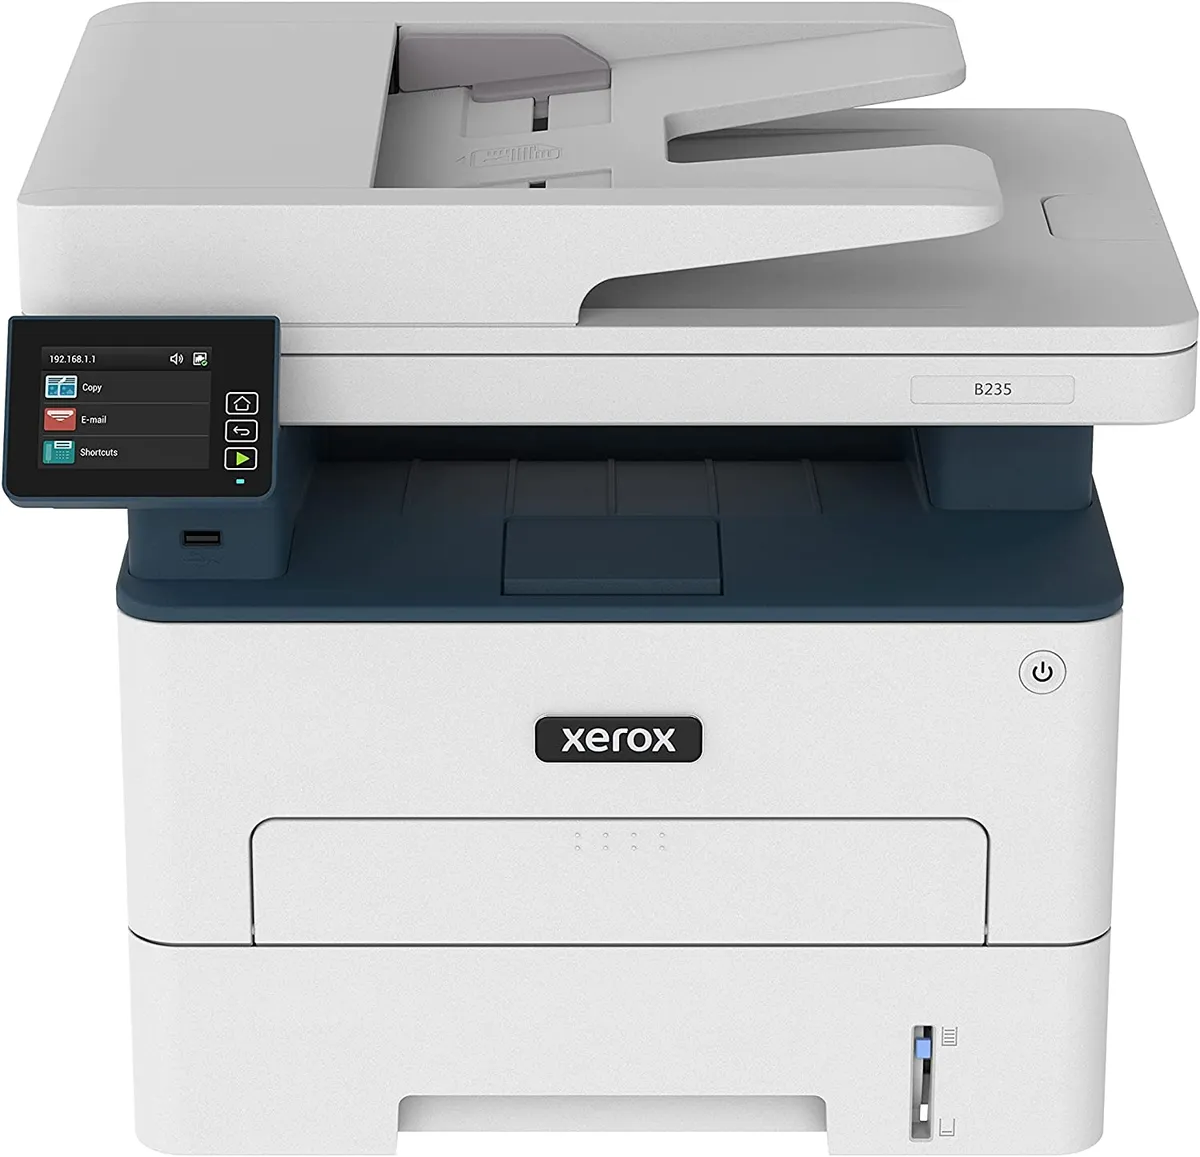 The best printers for printing on card - the Xerox B235 printer, Amazon